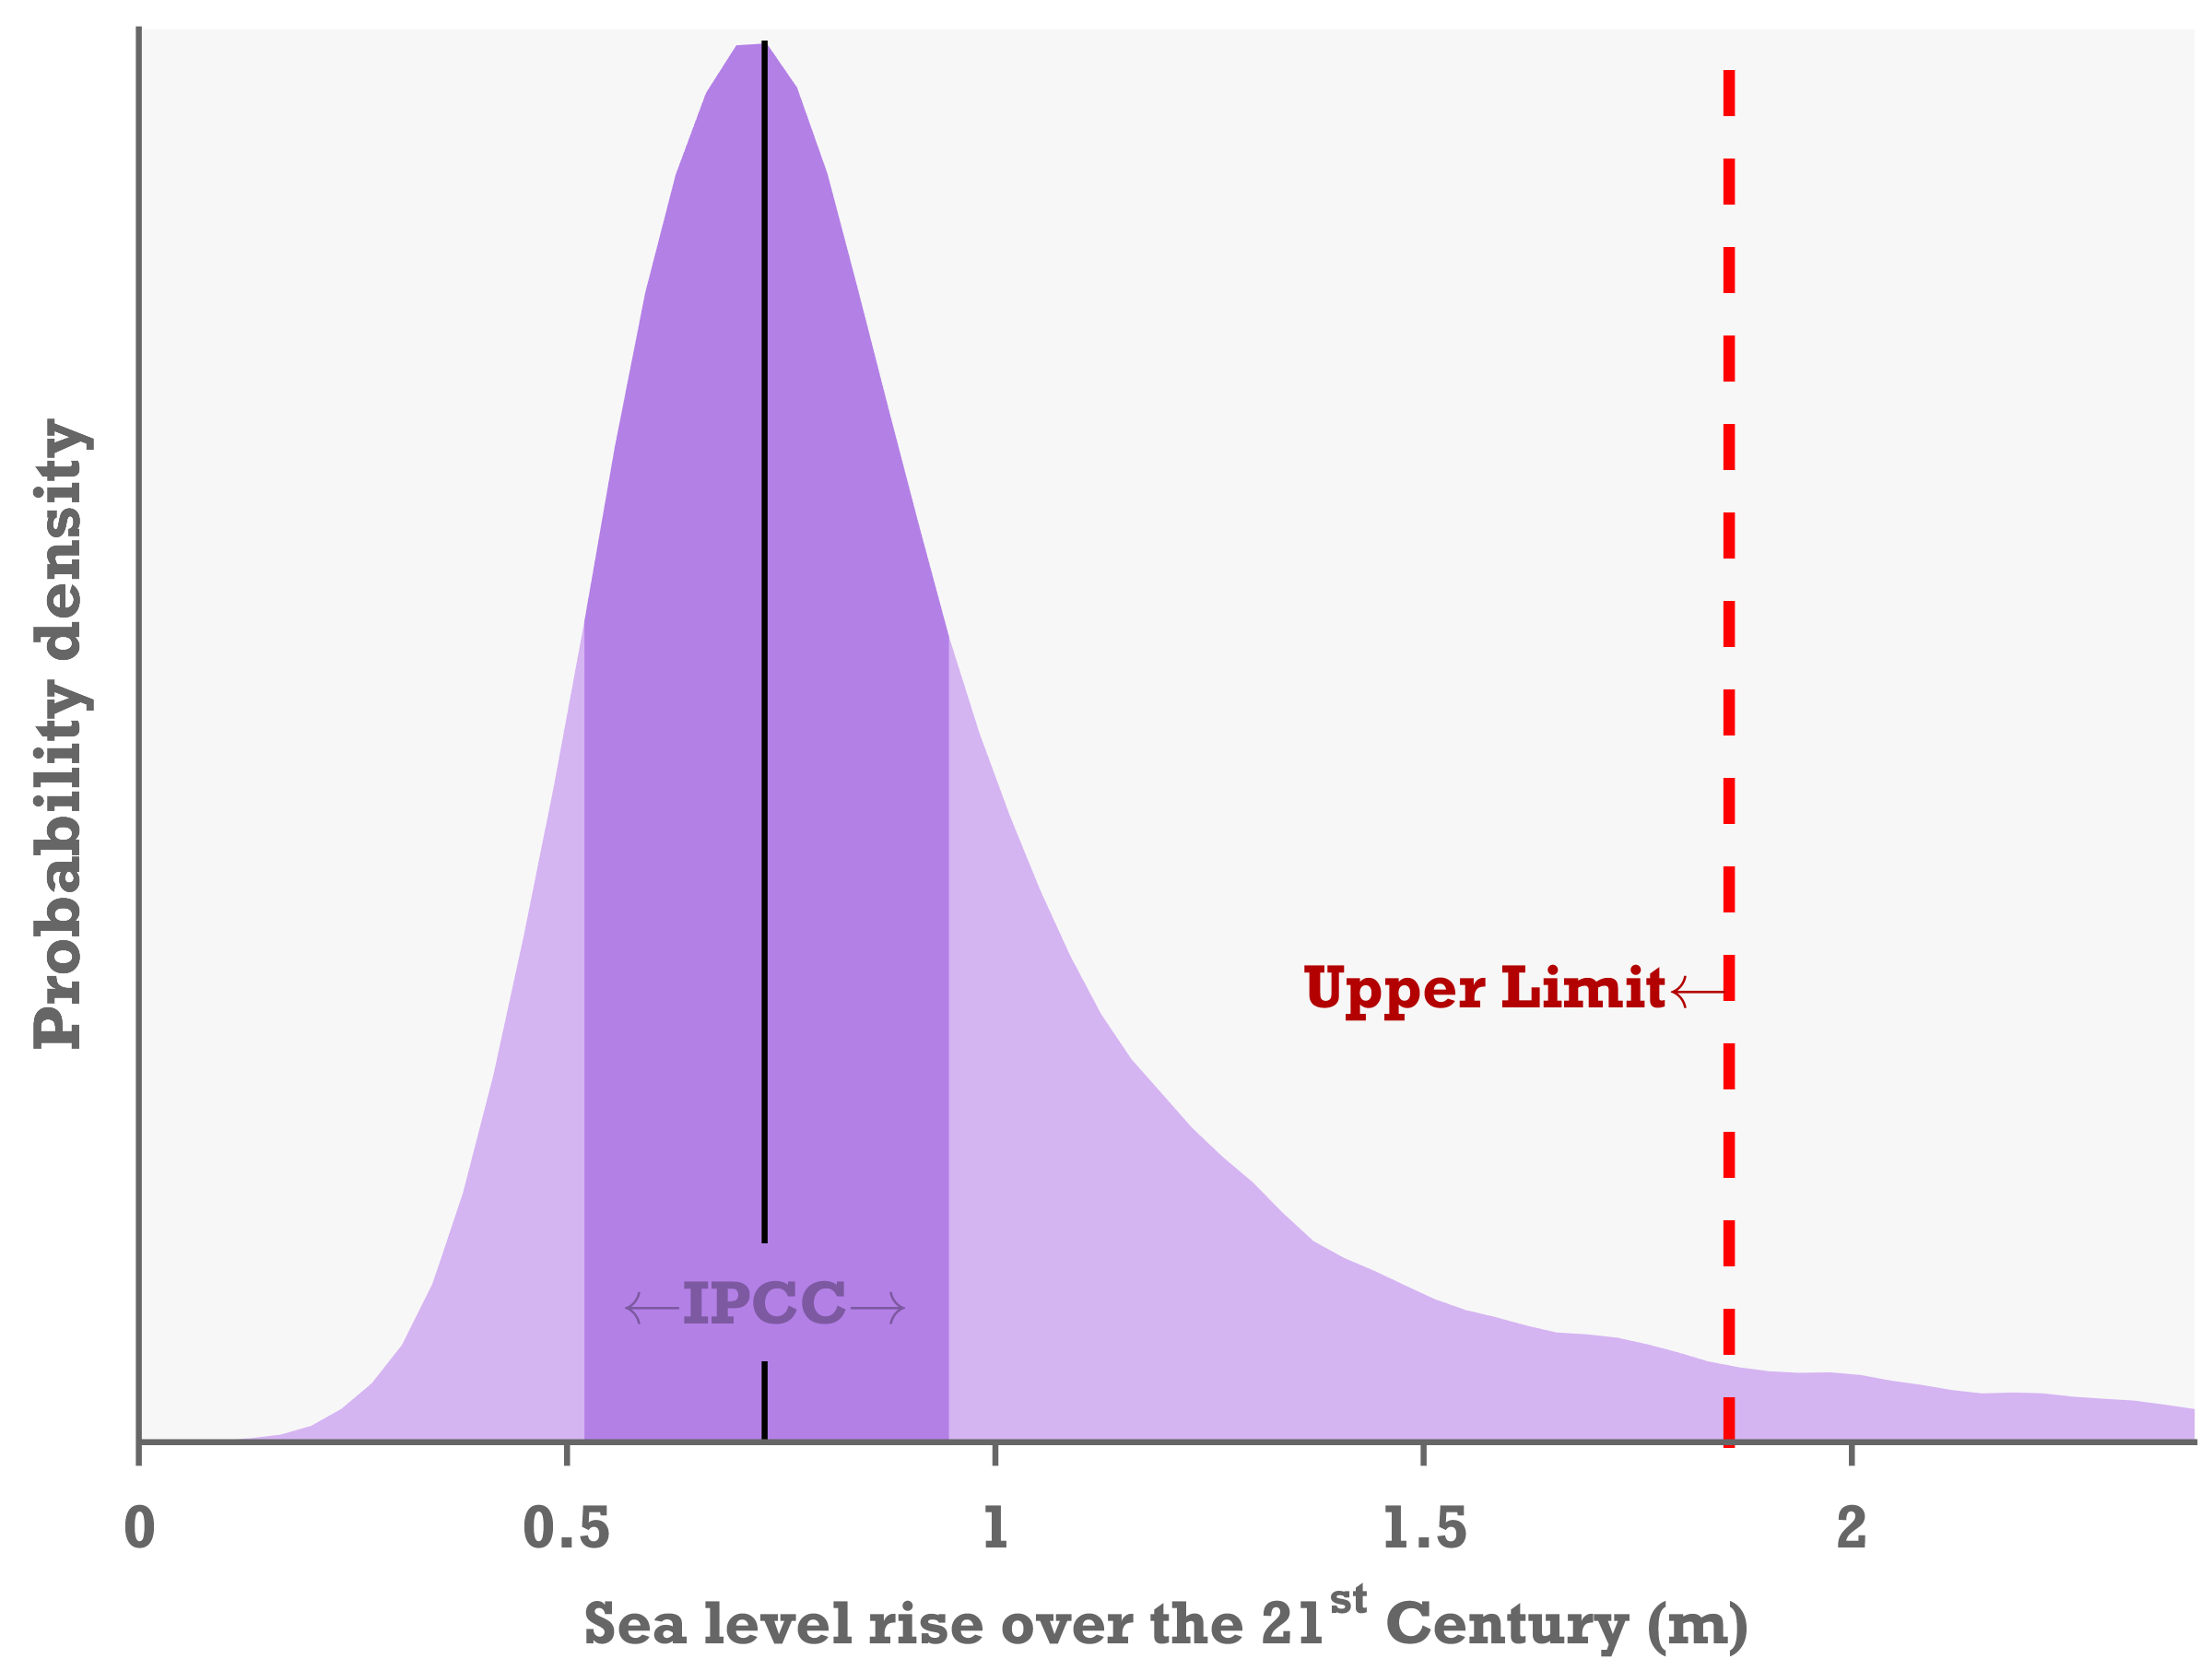 Graphical representation of the full uncertainty in the sea level projections over the 21st century. It is found that there is 95% certainty that sea level rise will not exceed 1.8m this century (red). Darker purple shows the likely range of sea level rise as projected in the IPCC fifth assessment report under a scenario with rising emissions throughout the 21st century (RCP8.5).